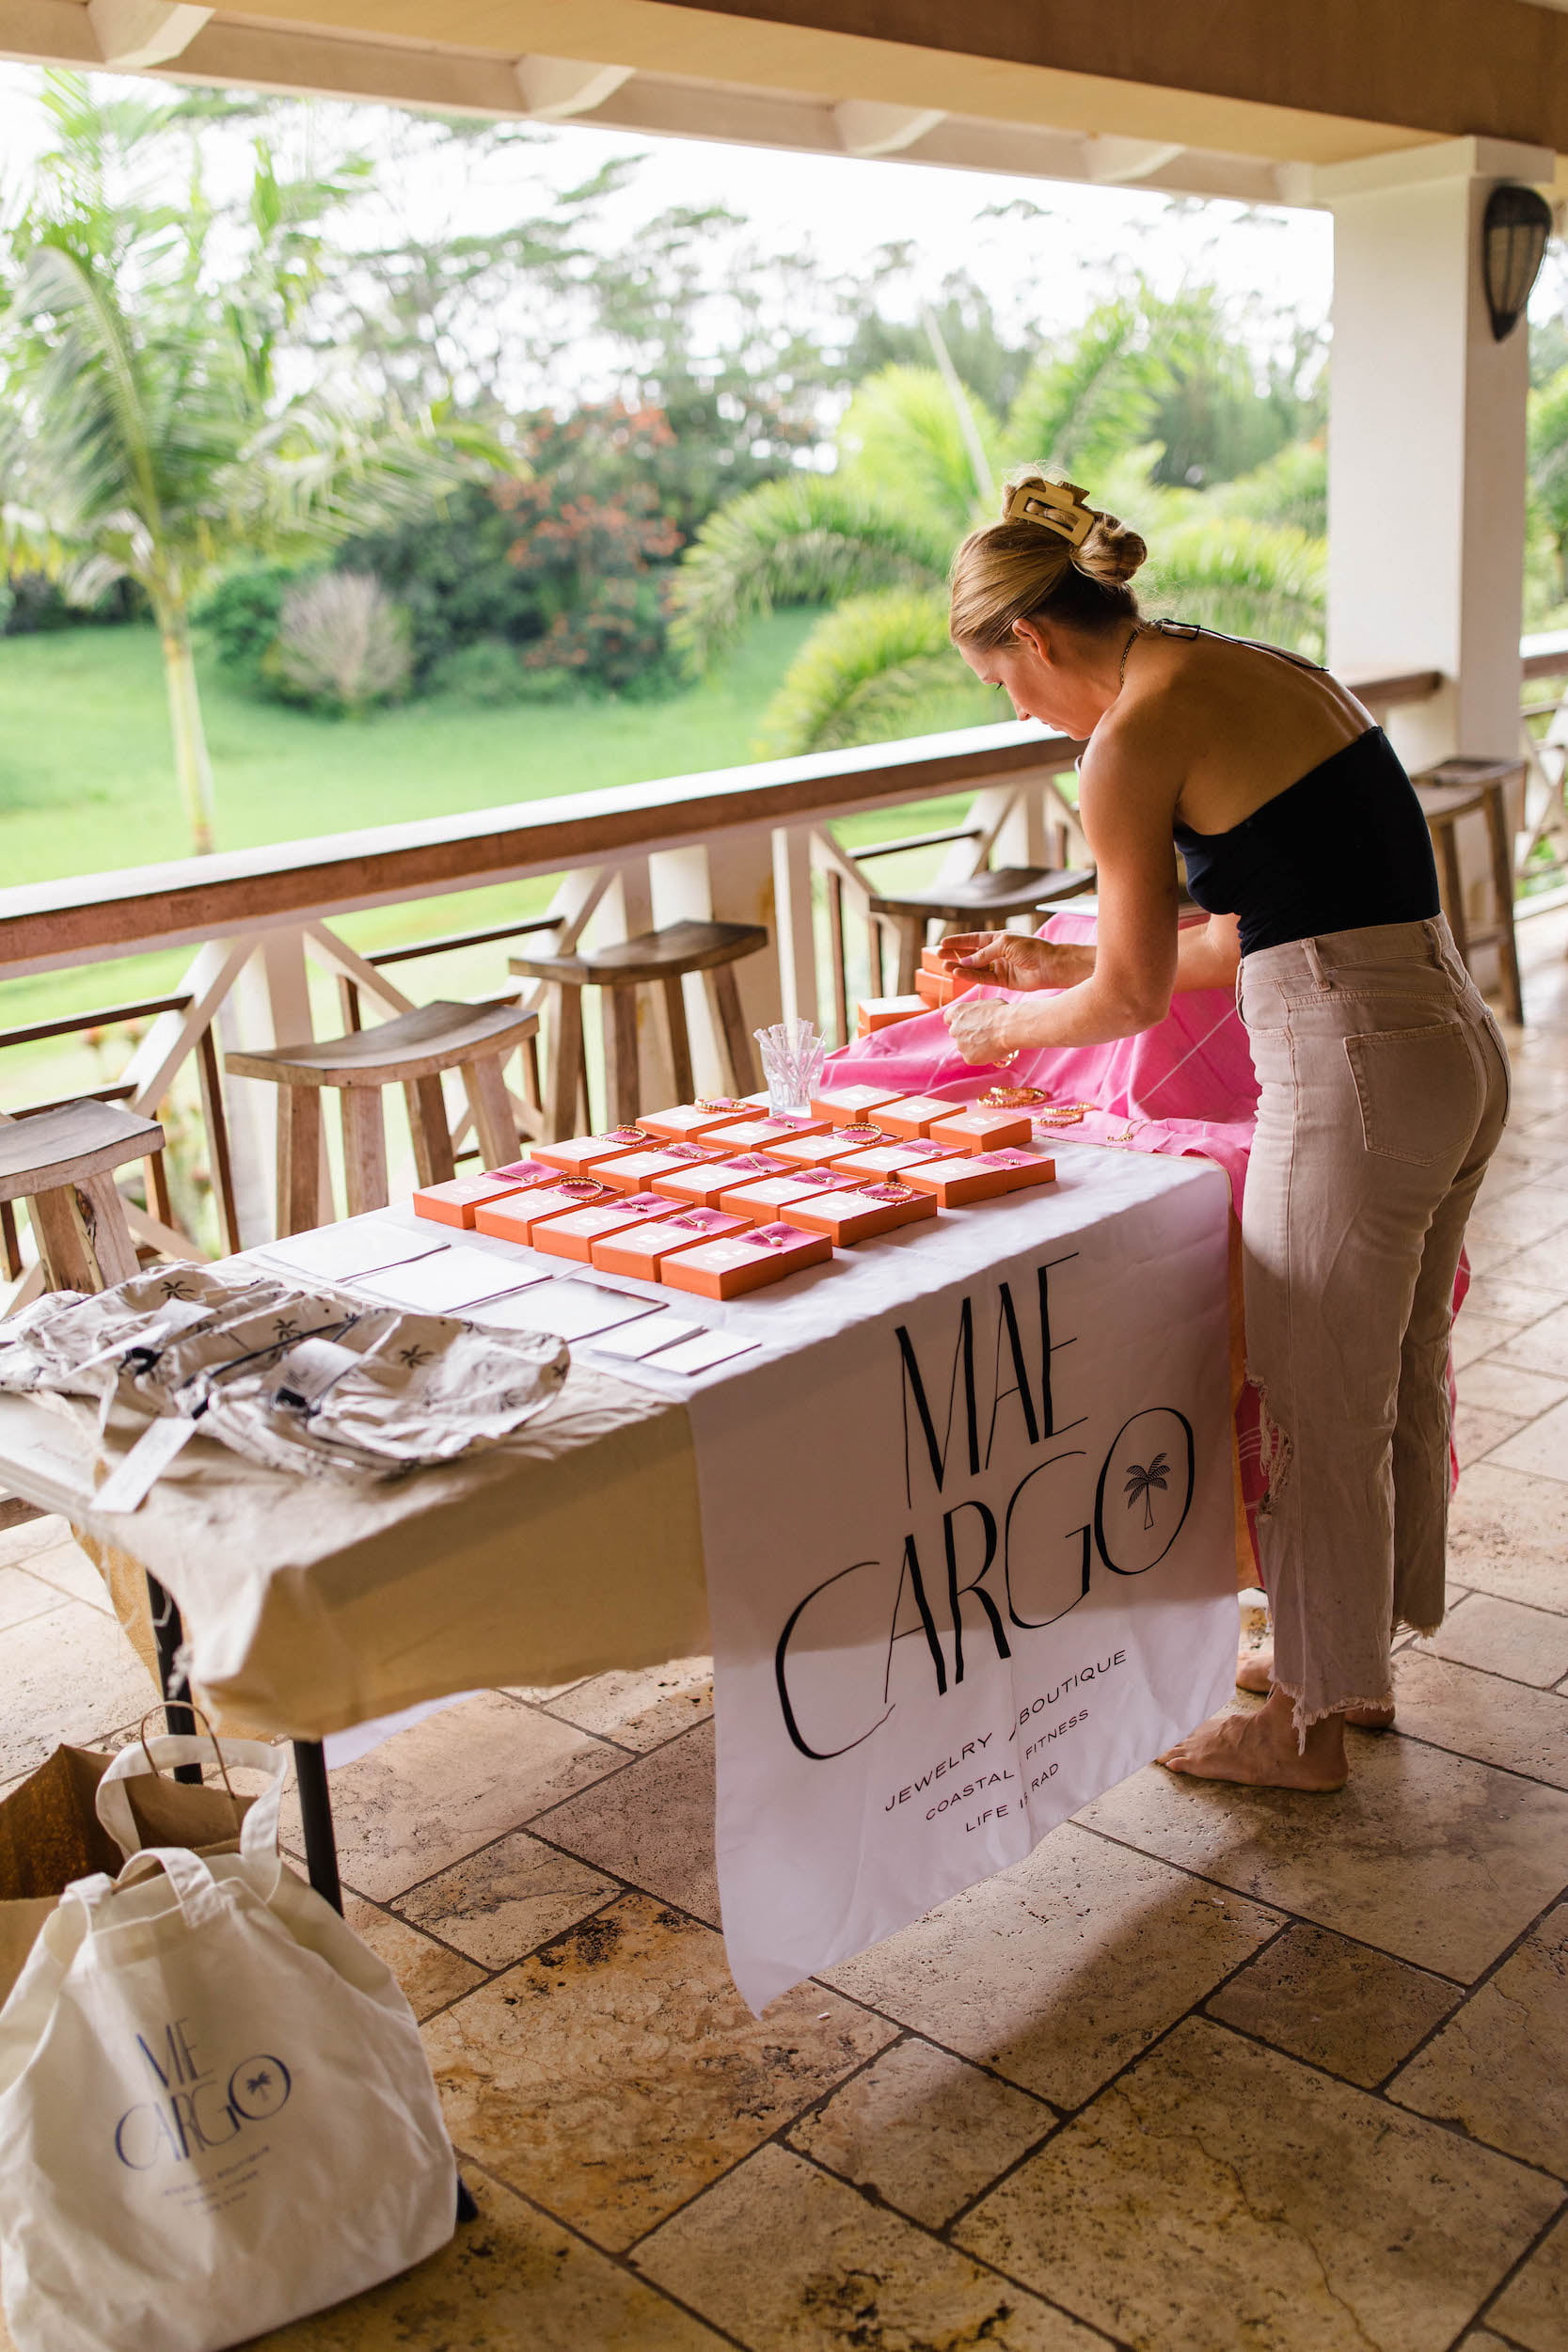 Kate from Mae Cargo setting up her selection for our Kauai Retreat attendees